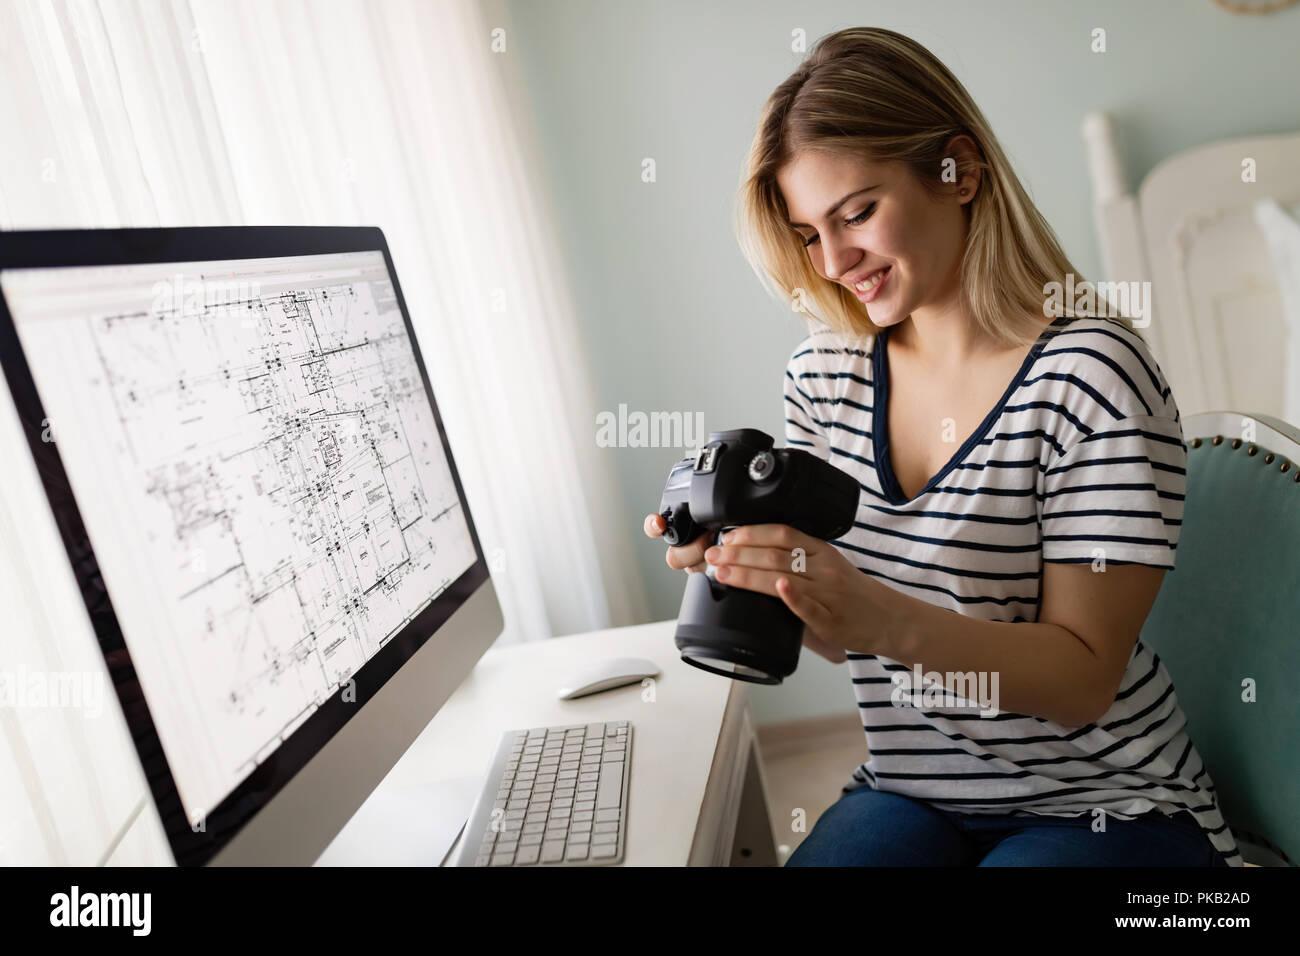 Portrait of young woman designing at home Stock Photo